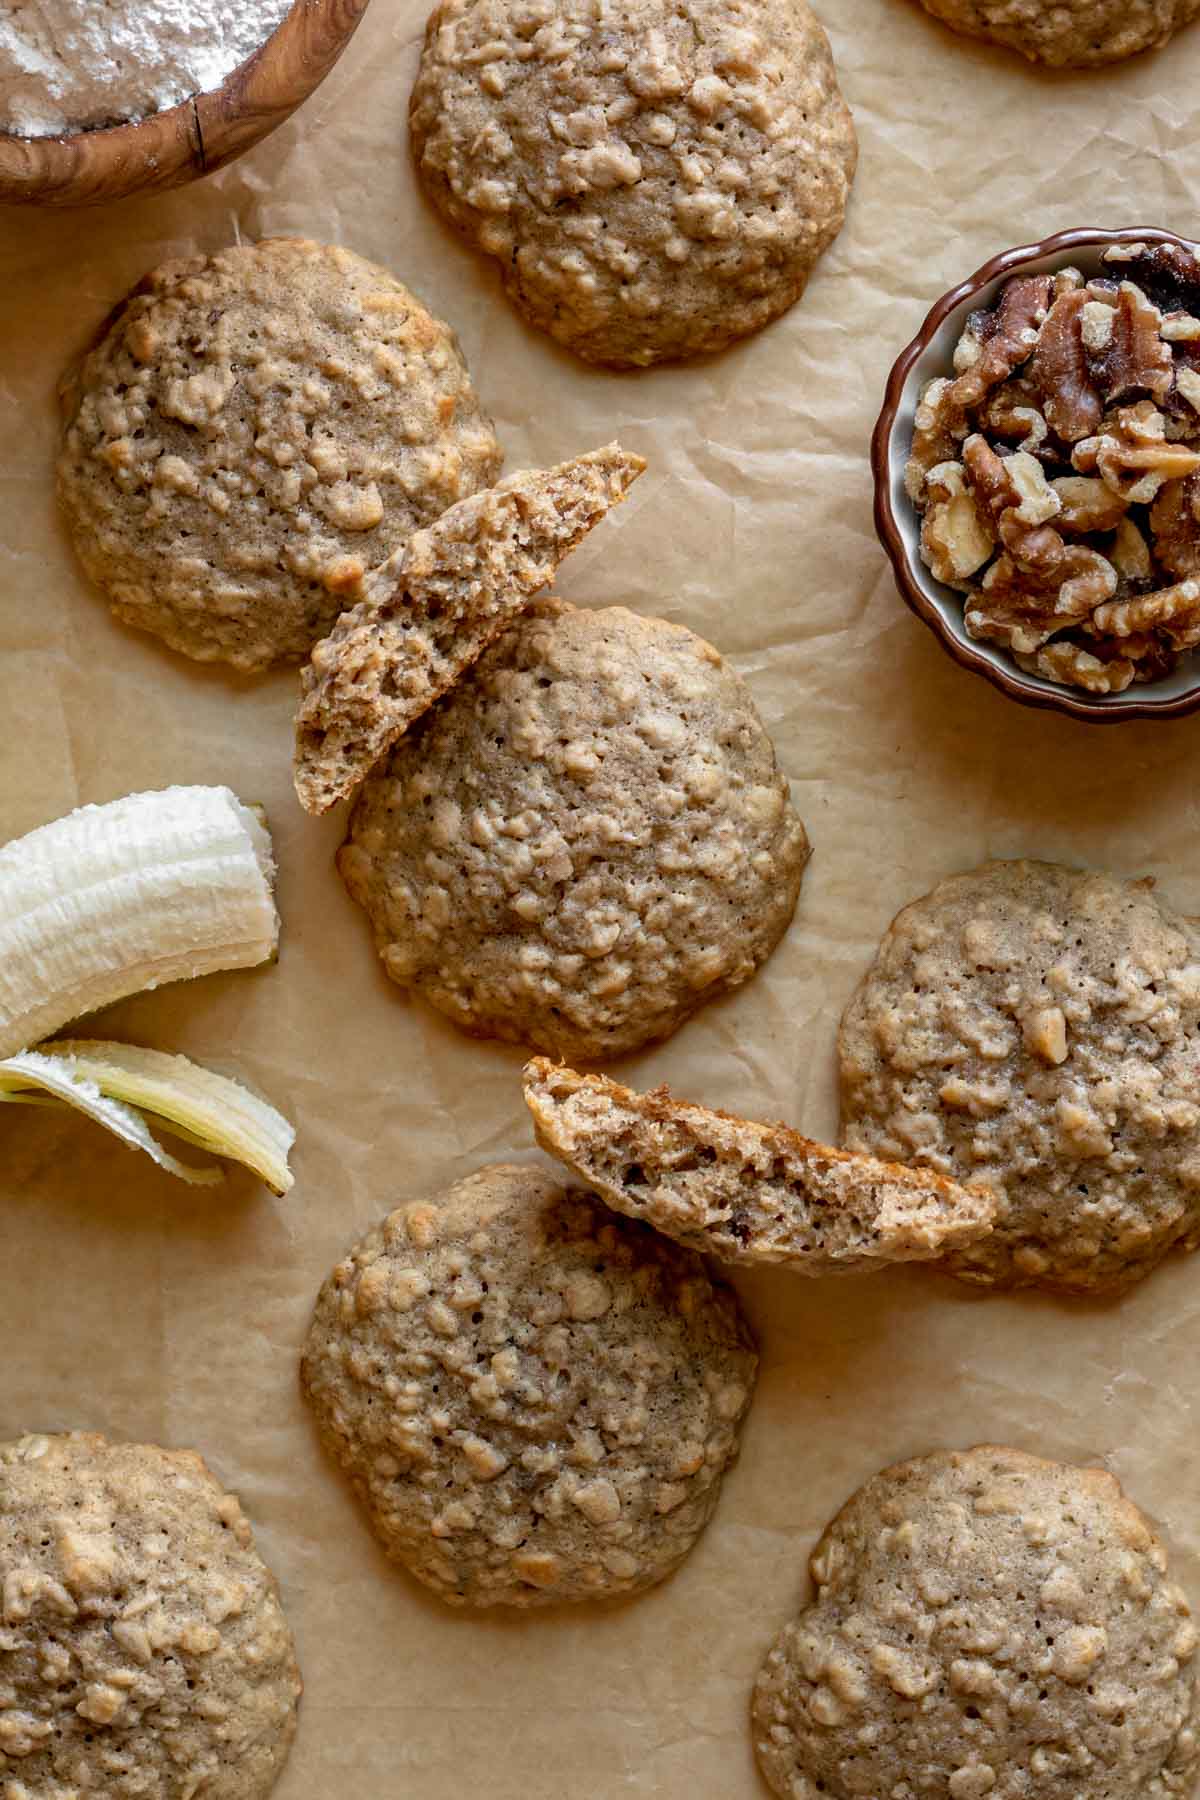 Banana Bread Cookies some cookies on brown parchment paper with half peeled banana off to side and one cookie broken in half, plus small bowl of walnuts on right